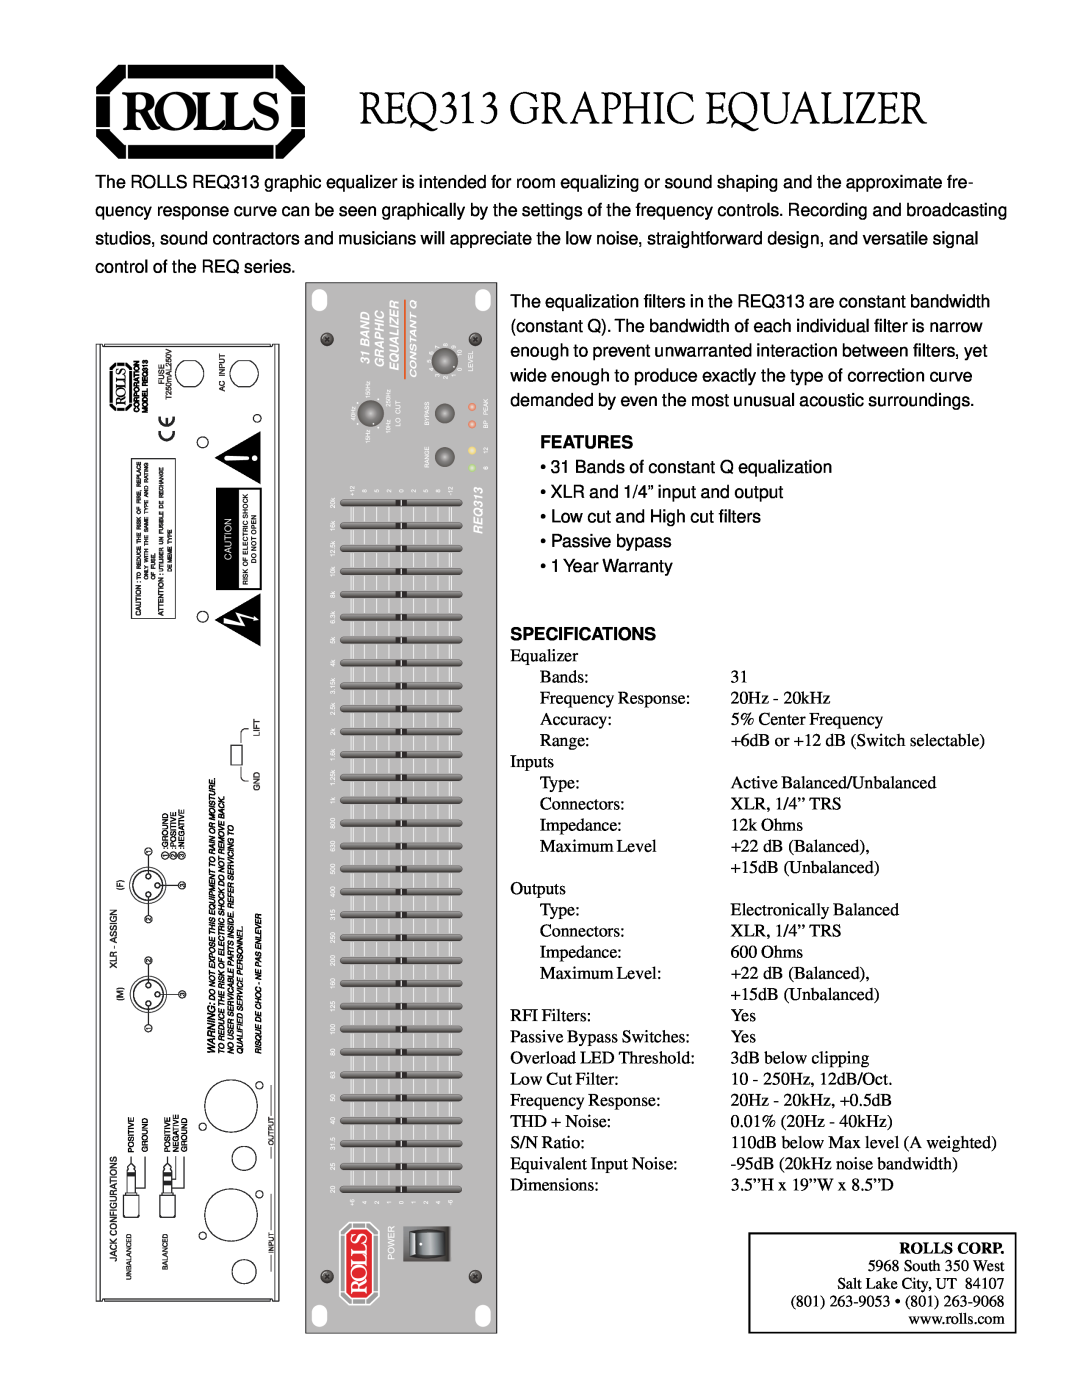 Rolls warranty REQ313 GRAPHIC EQUALIZER, Features, Specifications 